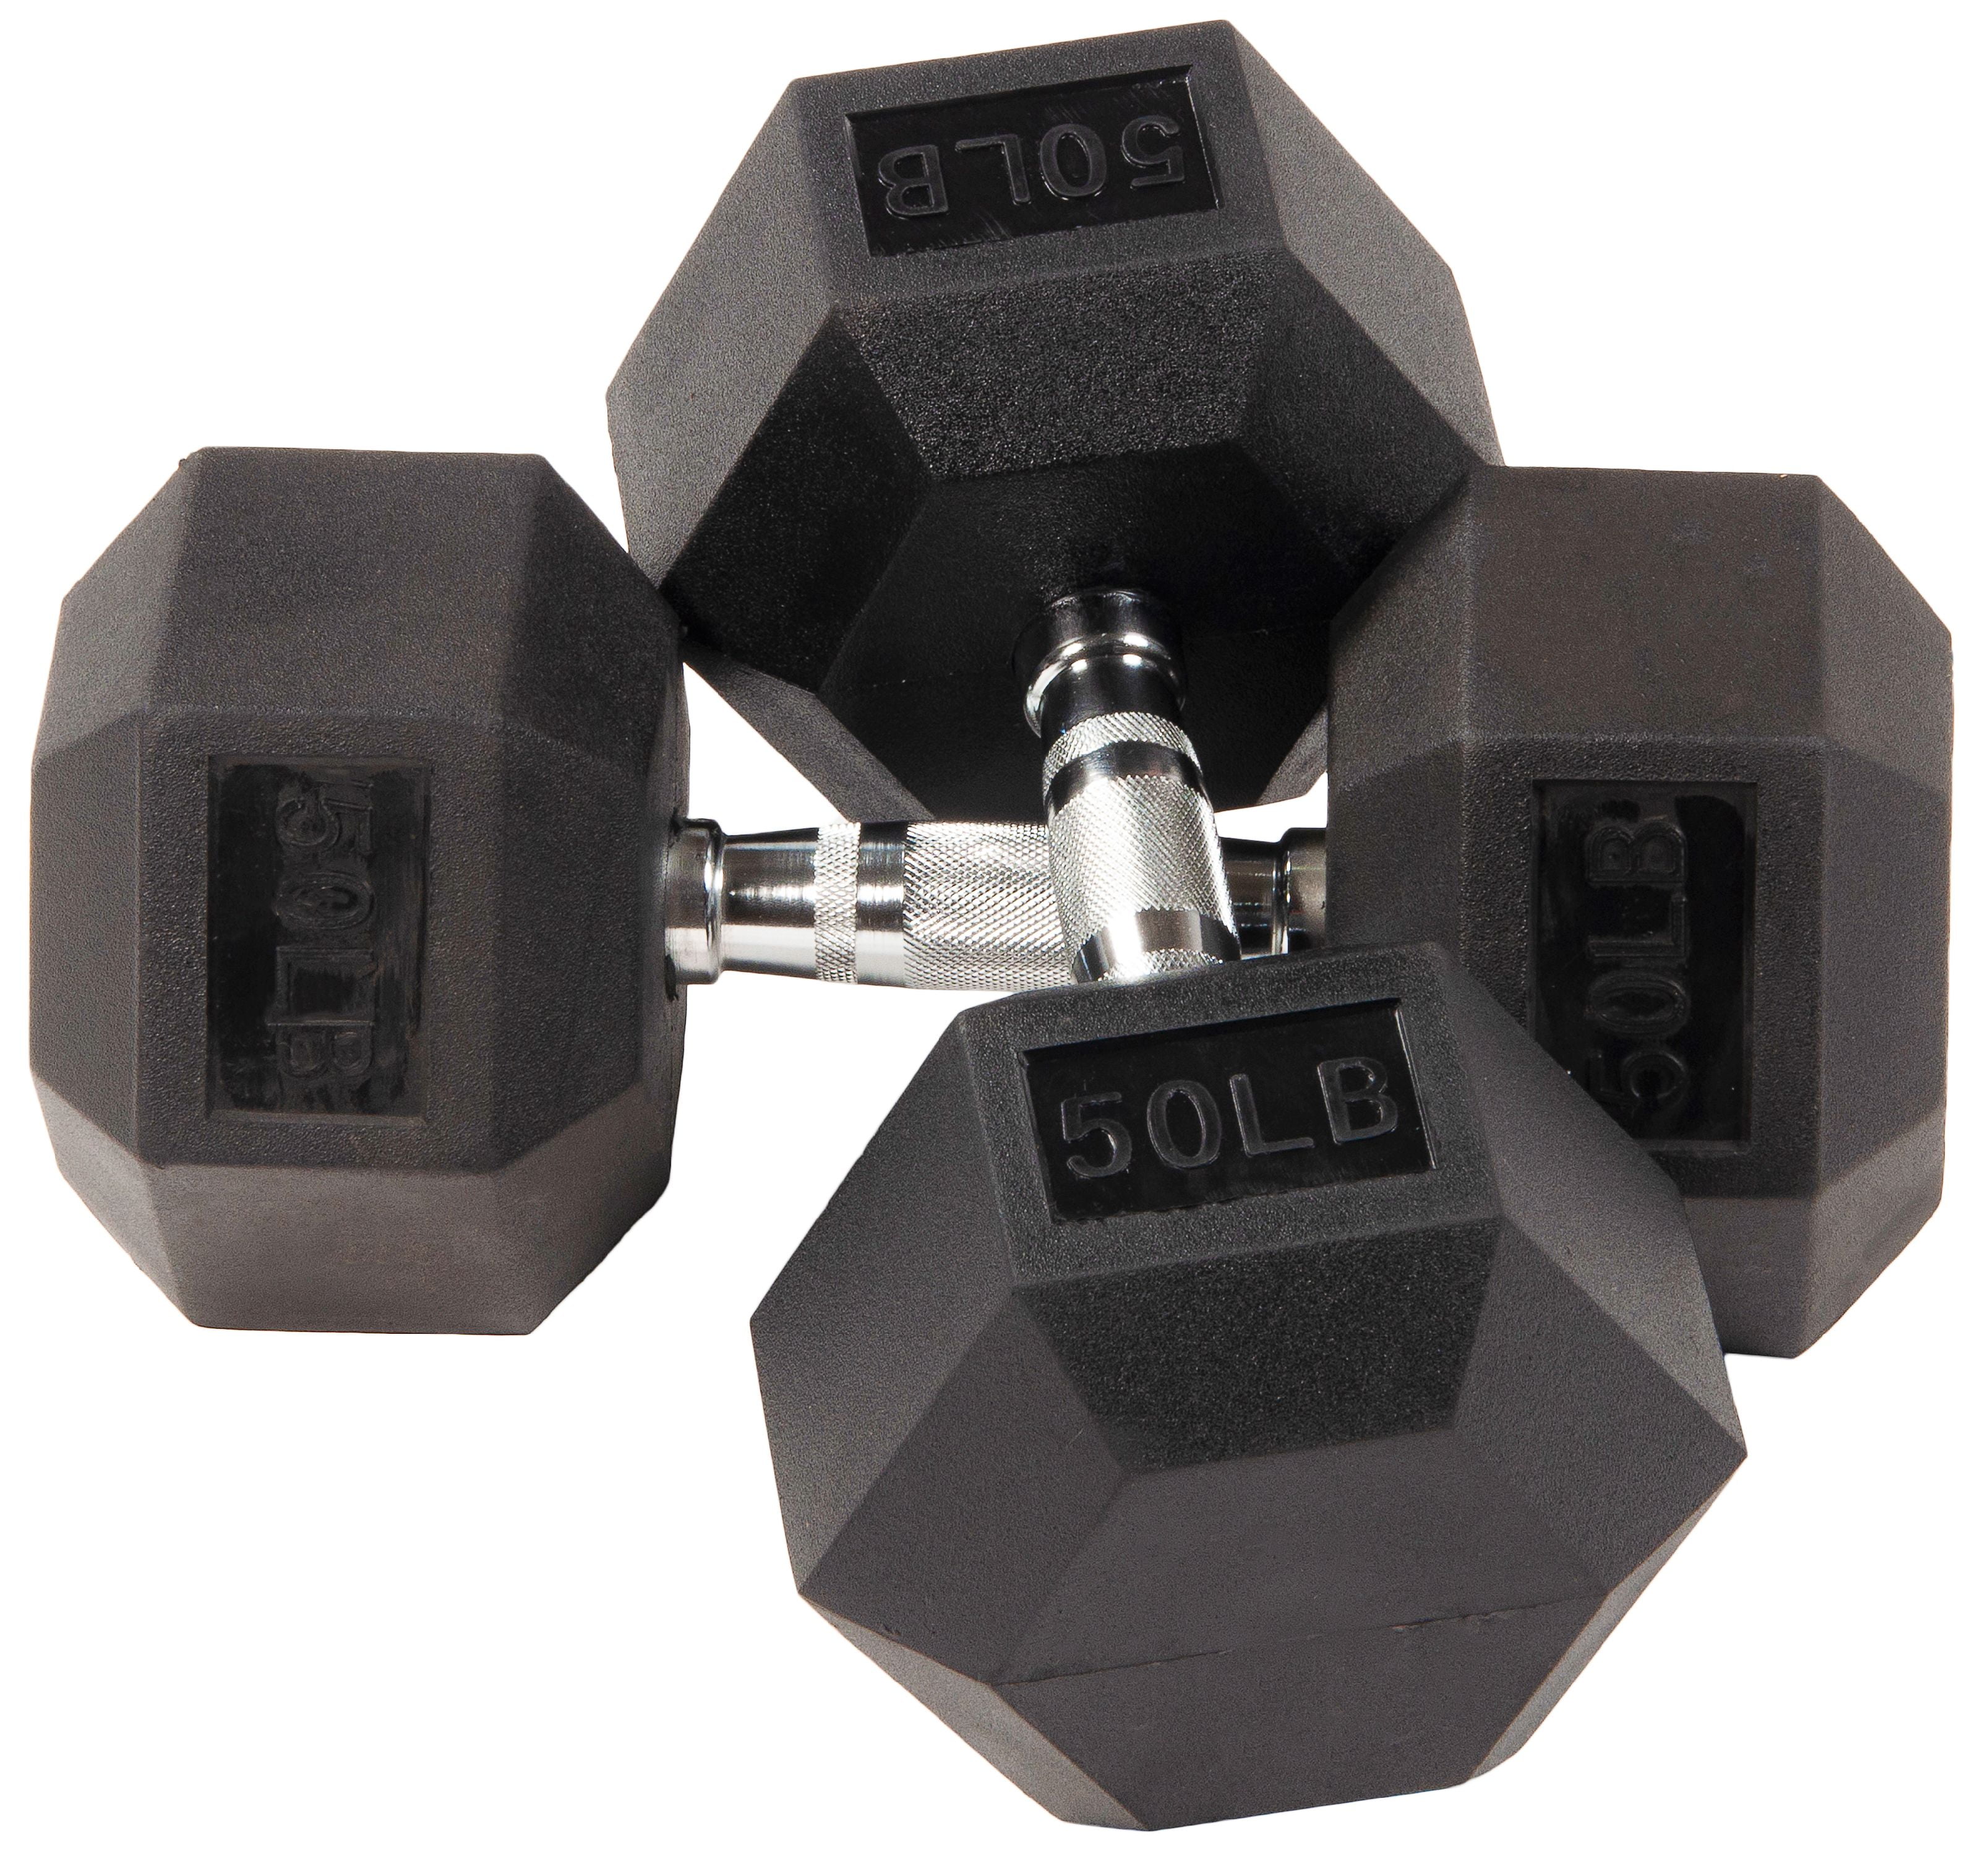 Details about   Rubber Coated Hex Dumbbell Hand Weight Set 15 25 20 45 LB  Metal FITNESS 30 